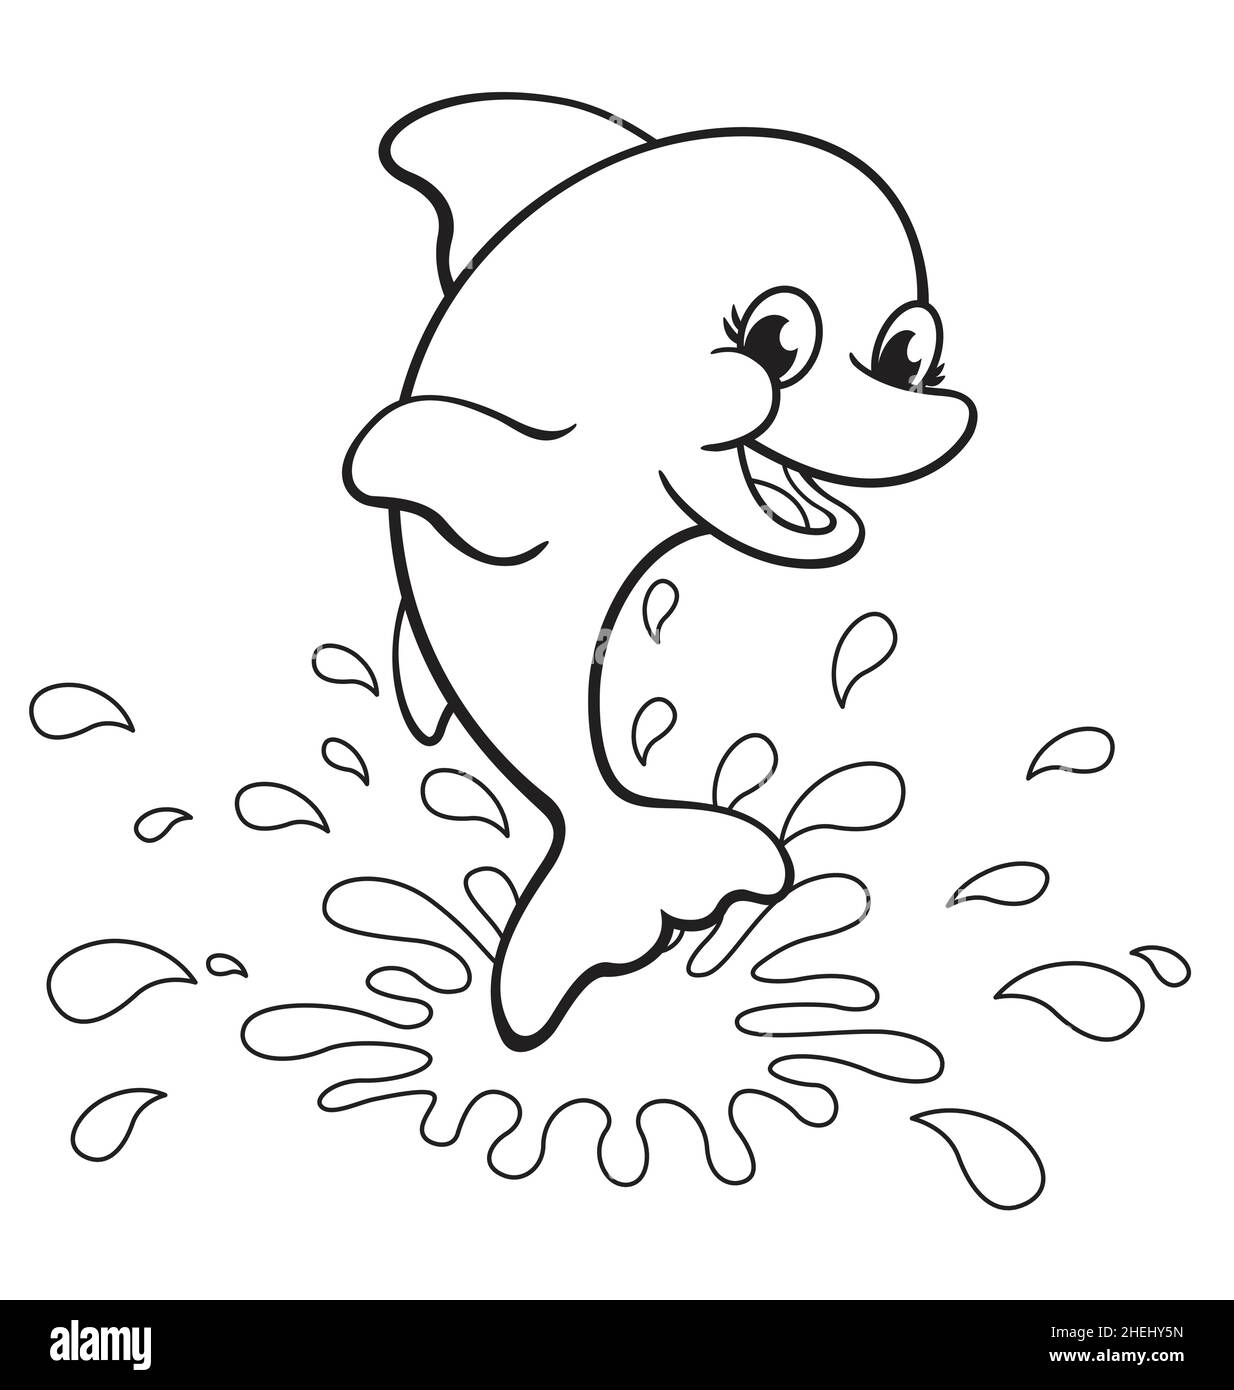 fun happy cute dolphin with splash for coloring colouring in activity book image isolated on white background Stock Vector